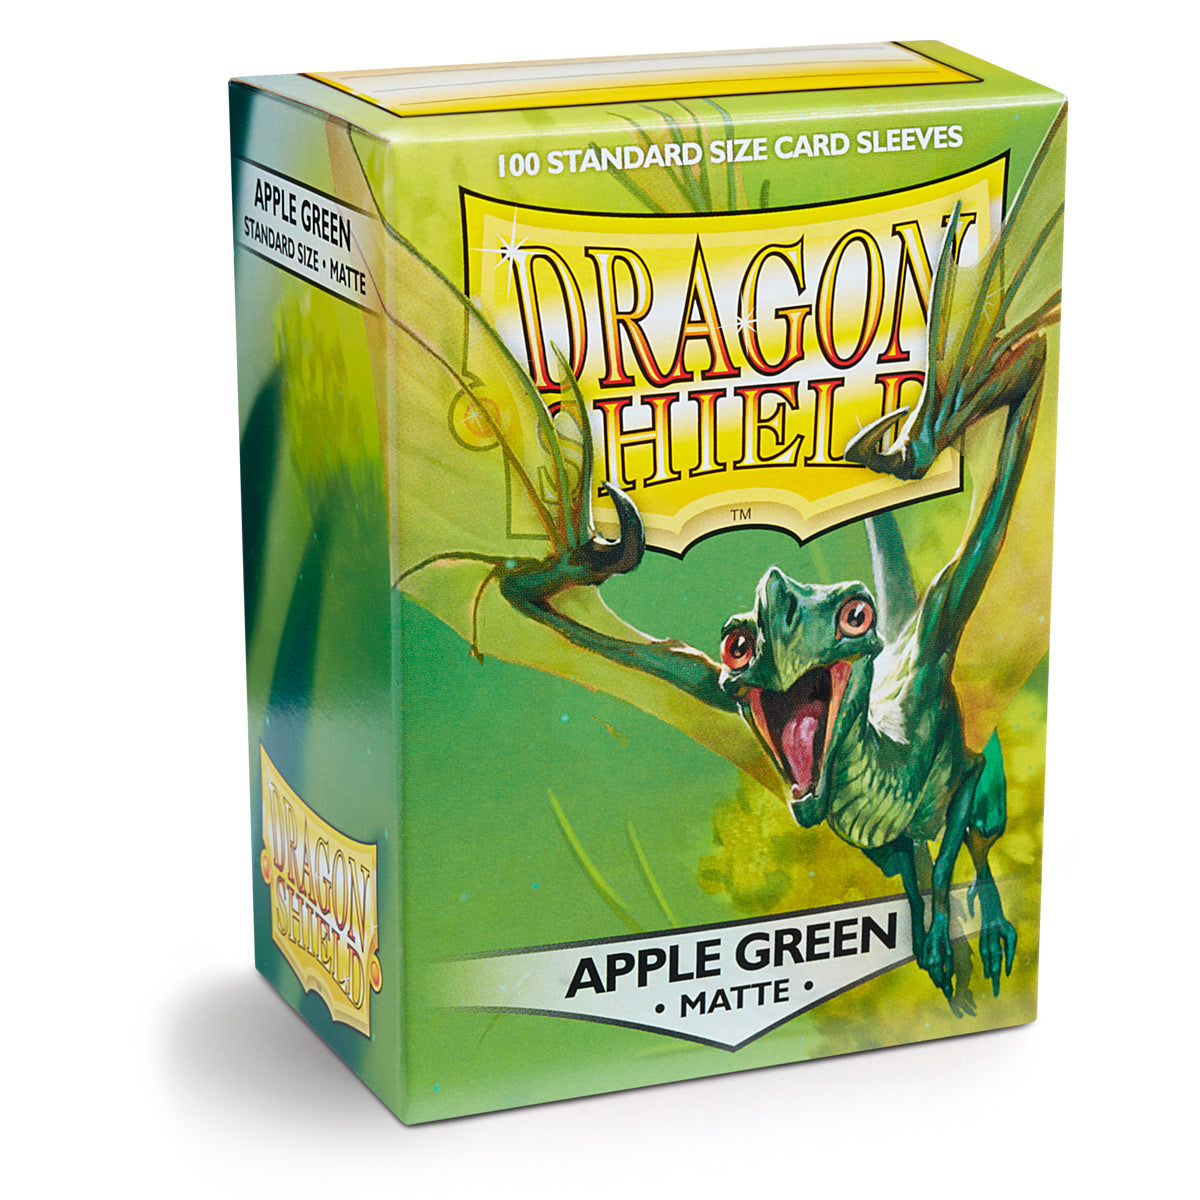 Dragon Shield Deck Protector Sleeves - Matte Apple Green (100 Count)